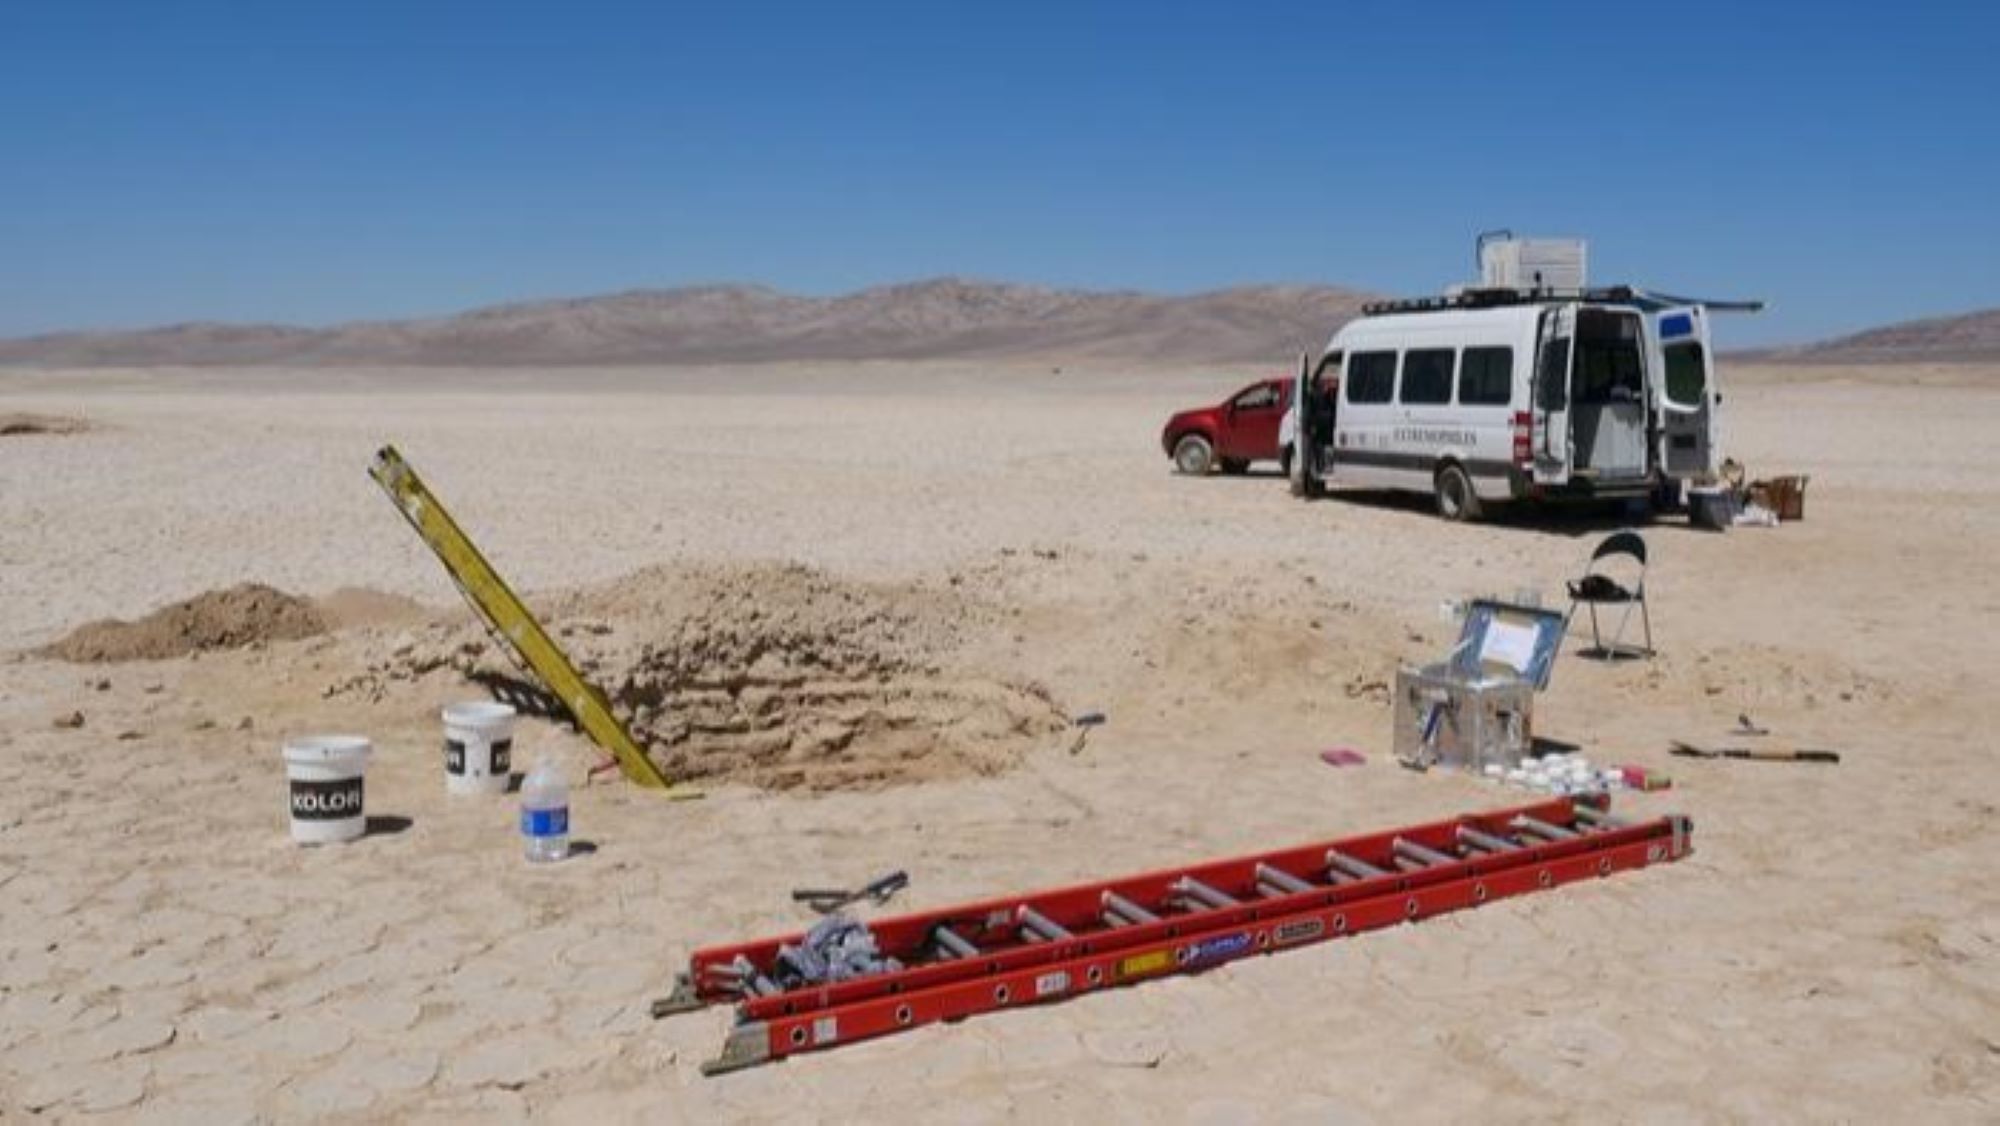 The study site in the Atacama Desert, pictured with a truck and van in the background and ladders and tools in the foreground